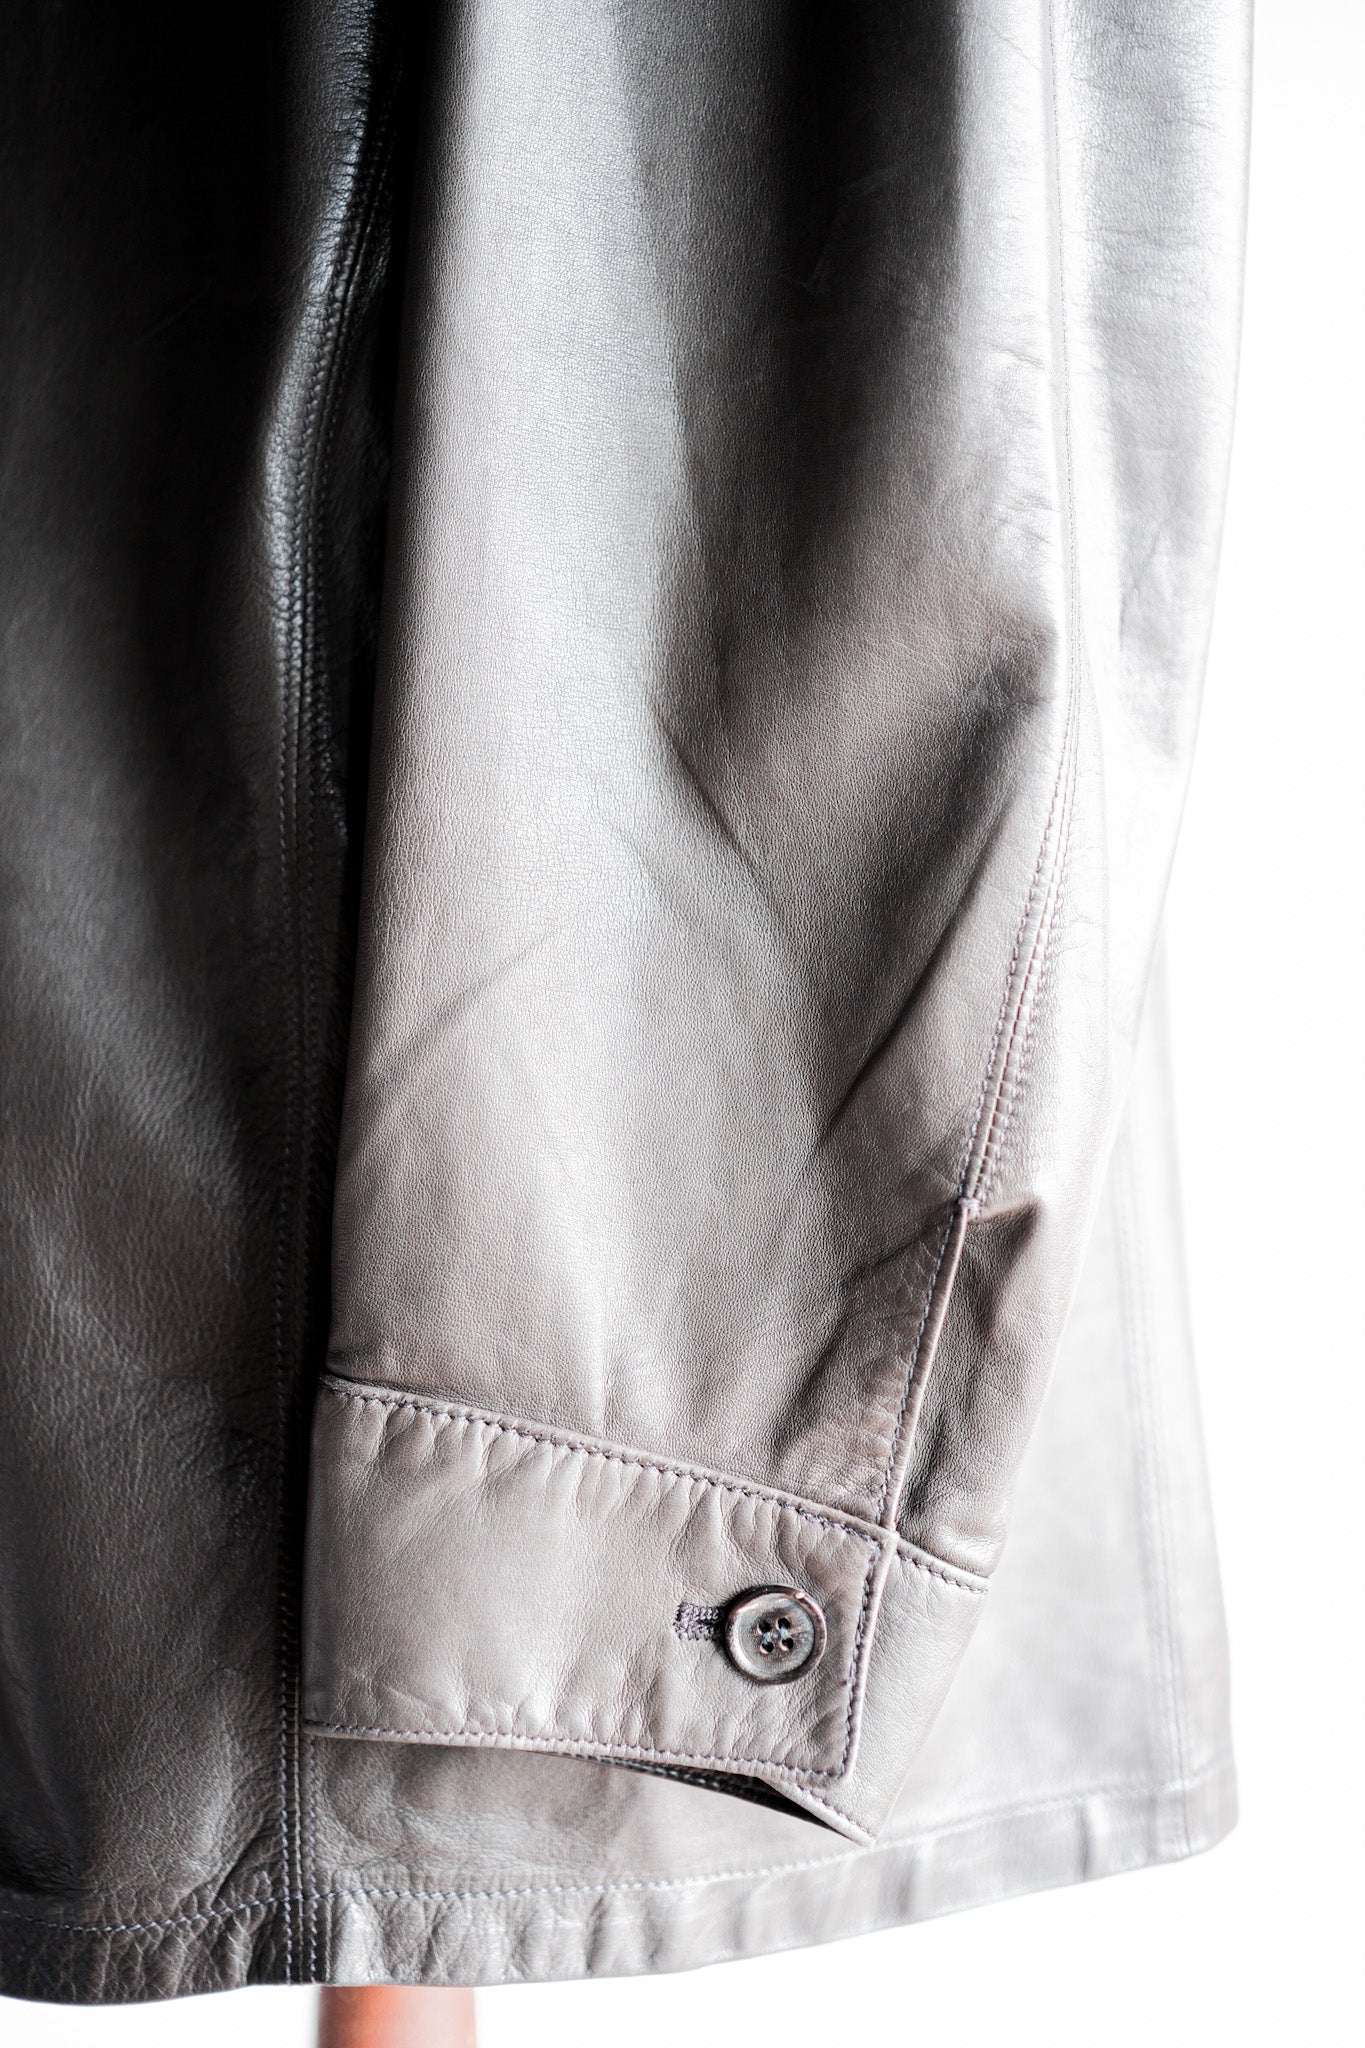 【~90's】Old SERAPHIN Lamb Leather Shirt Jacket Size.54